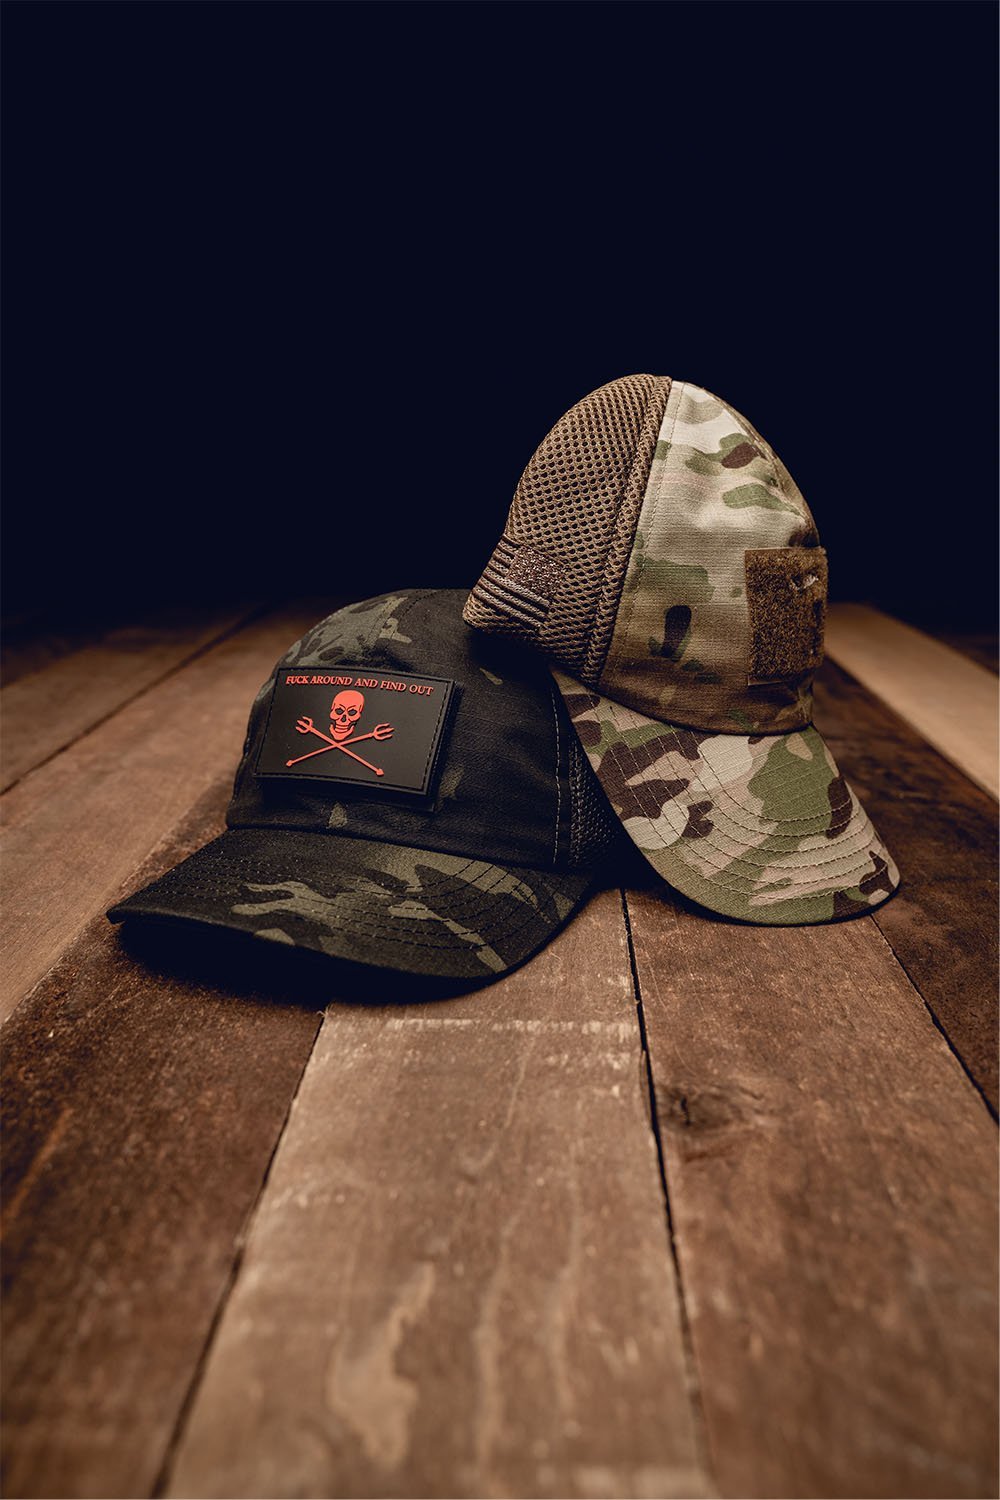 FAFO PVC Patch and American Made Hat Combo - Nine Line Apparel